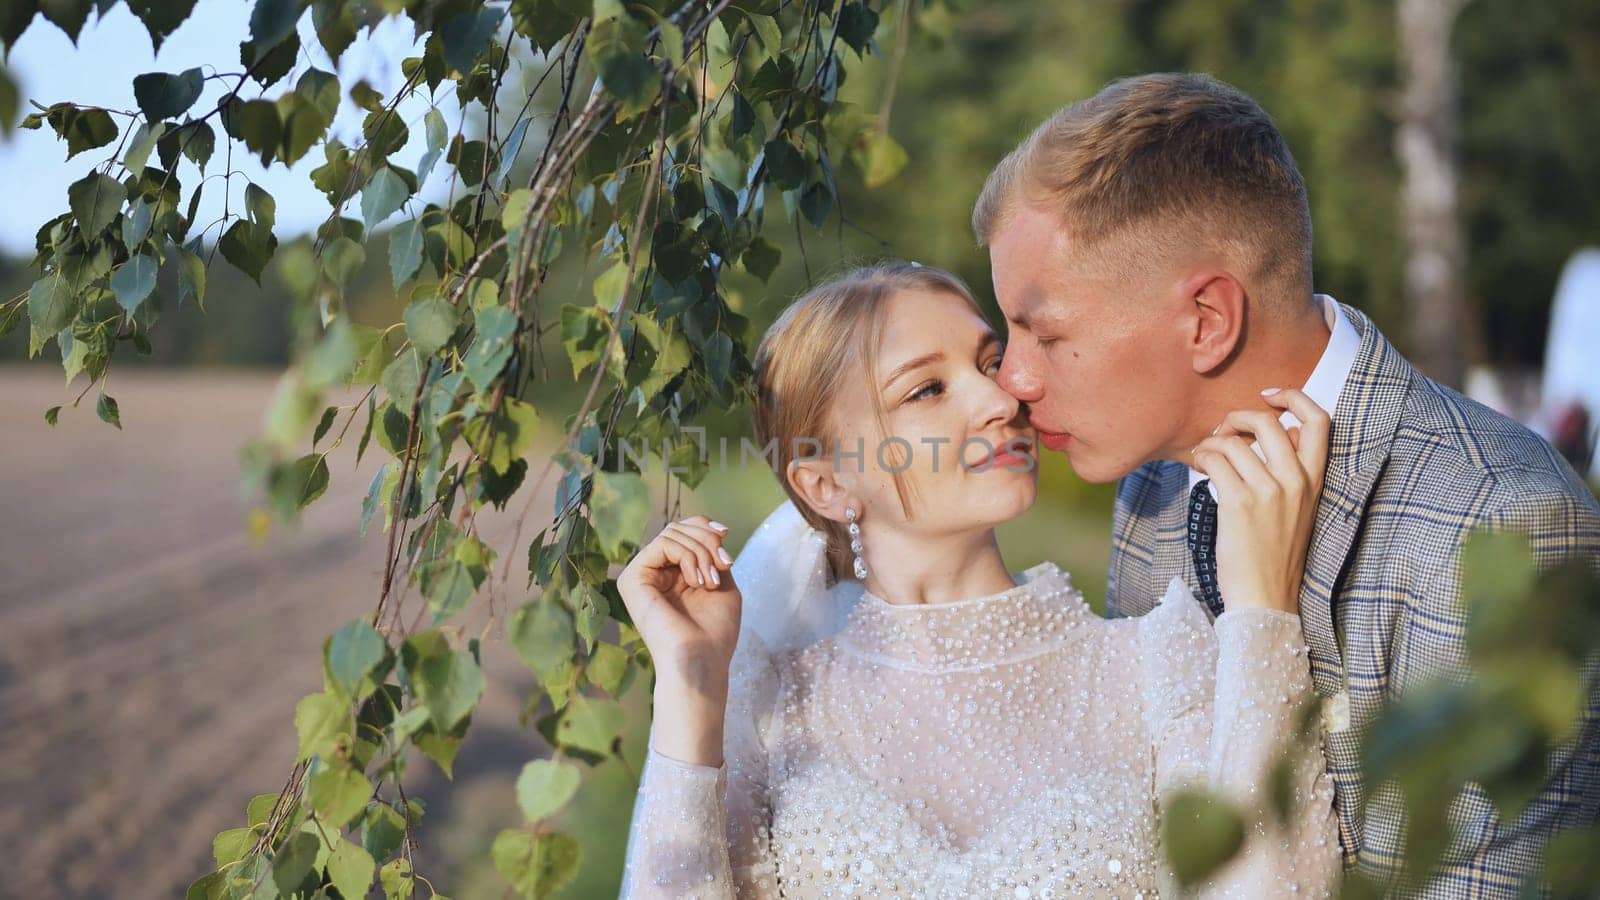 The bride and groom enjoy each other by the branches of a birch by DovidPro